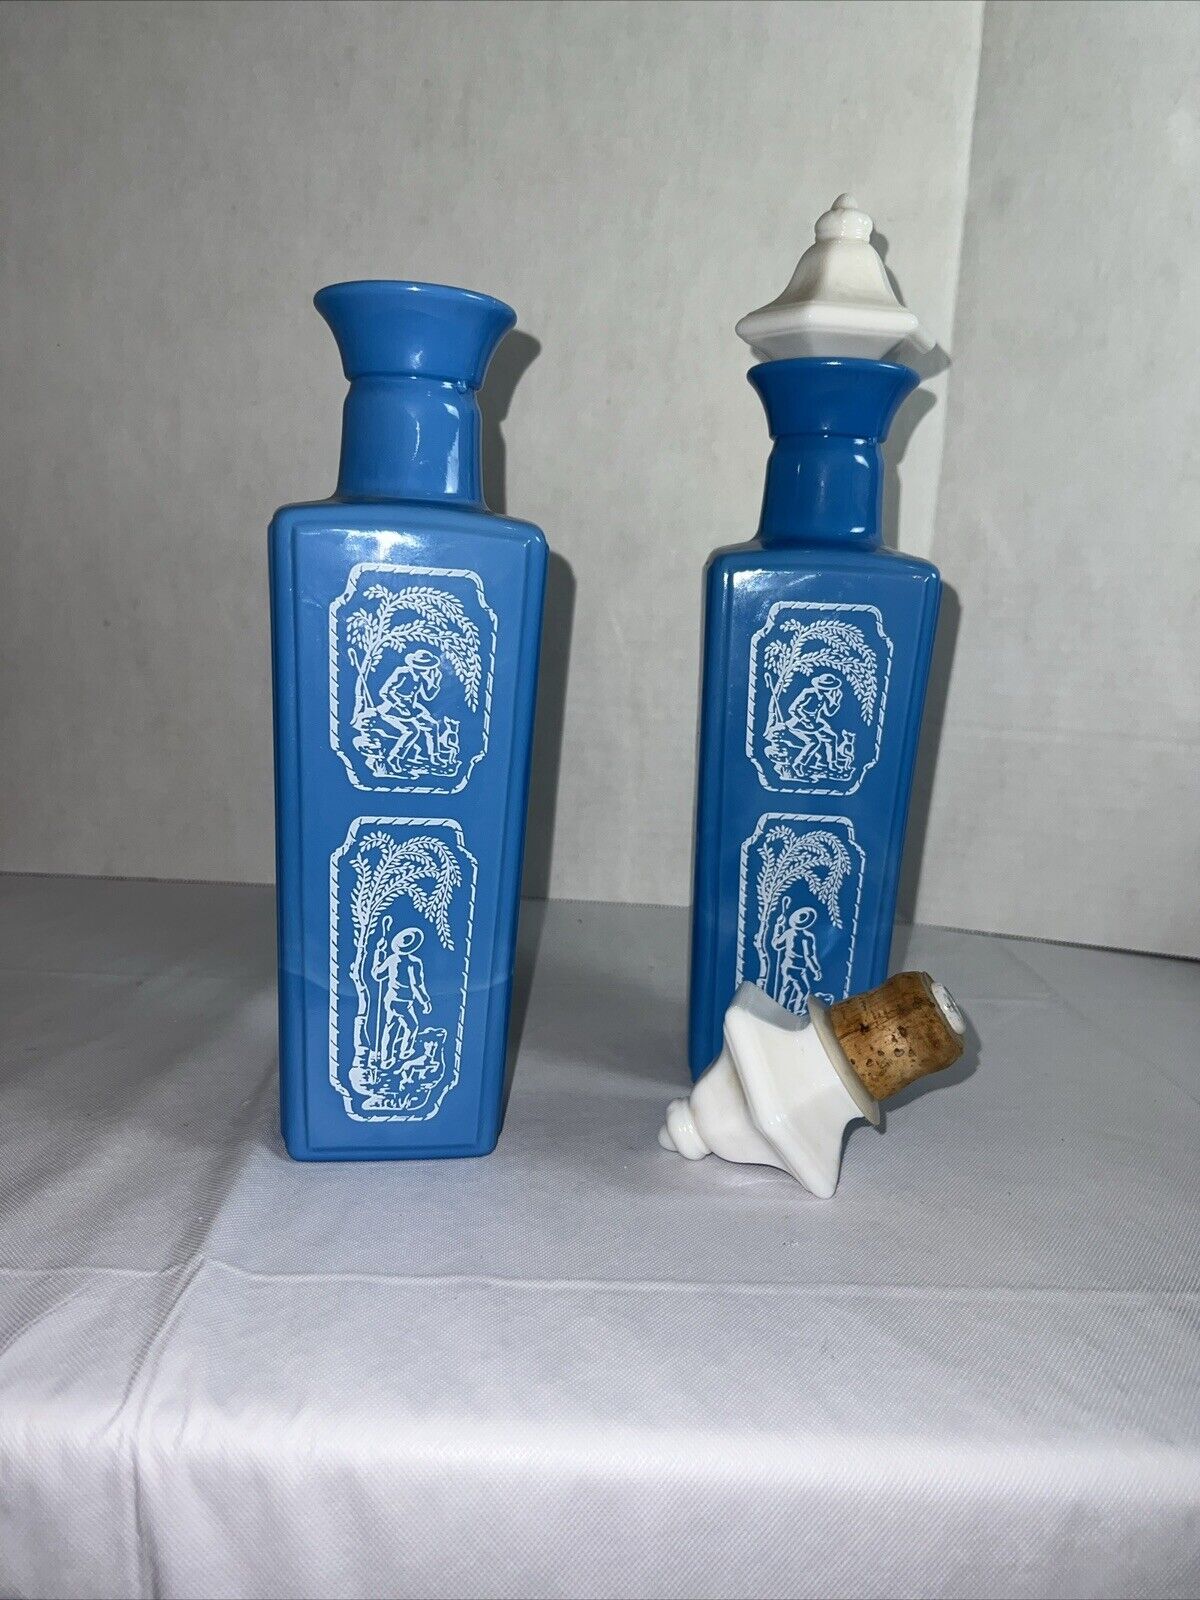 Set of 2, 1965 Jim Beam “Beam\'s Choice” Blue Decanters Cork Stoppers Milk Glass